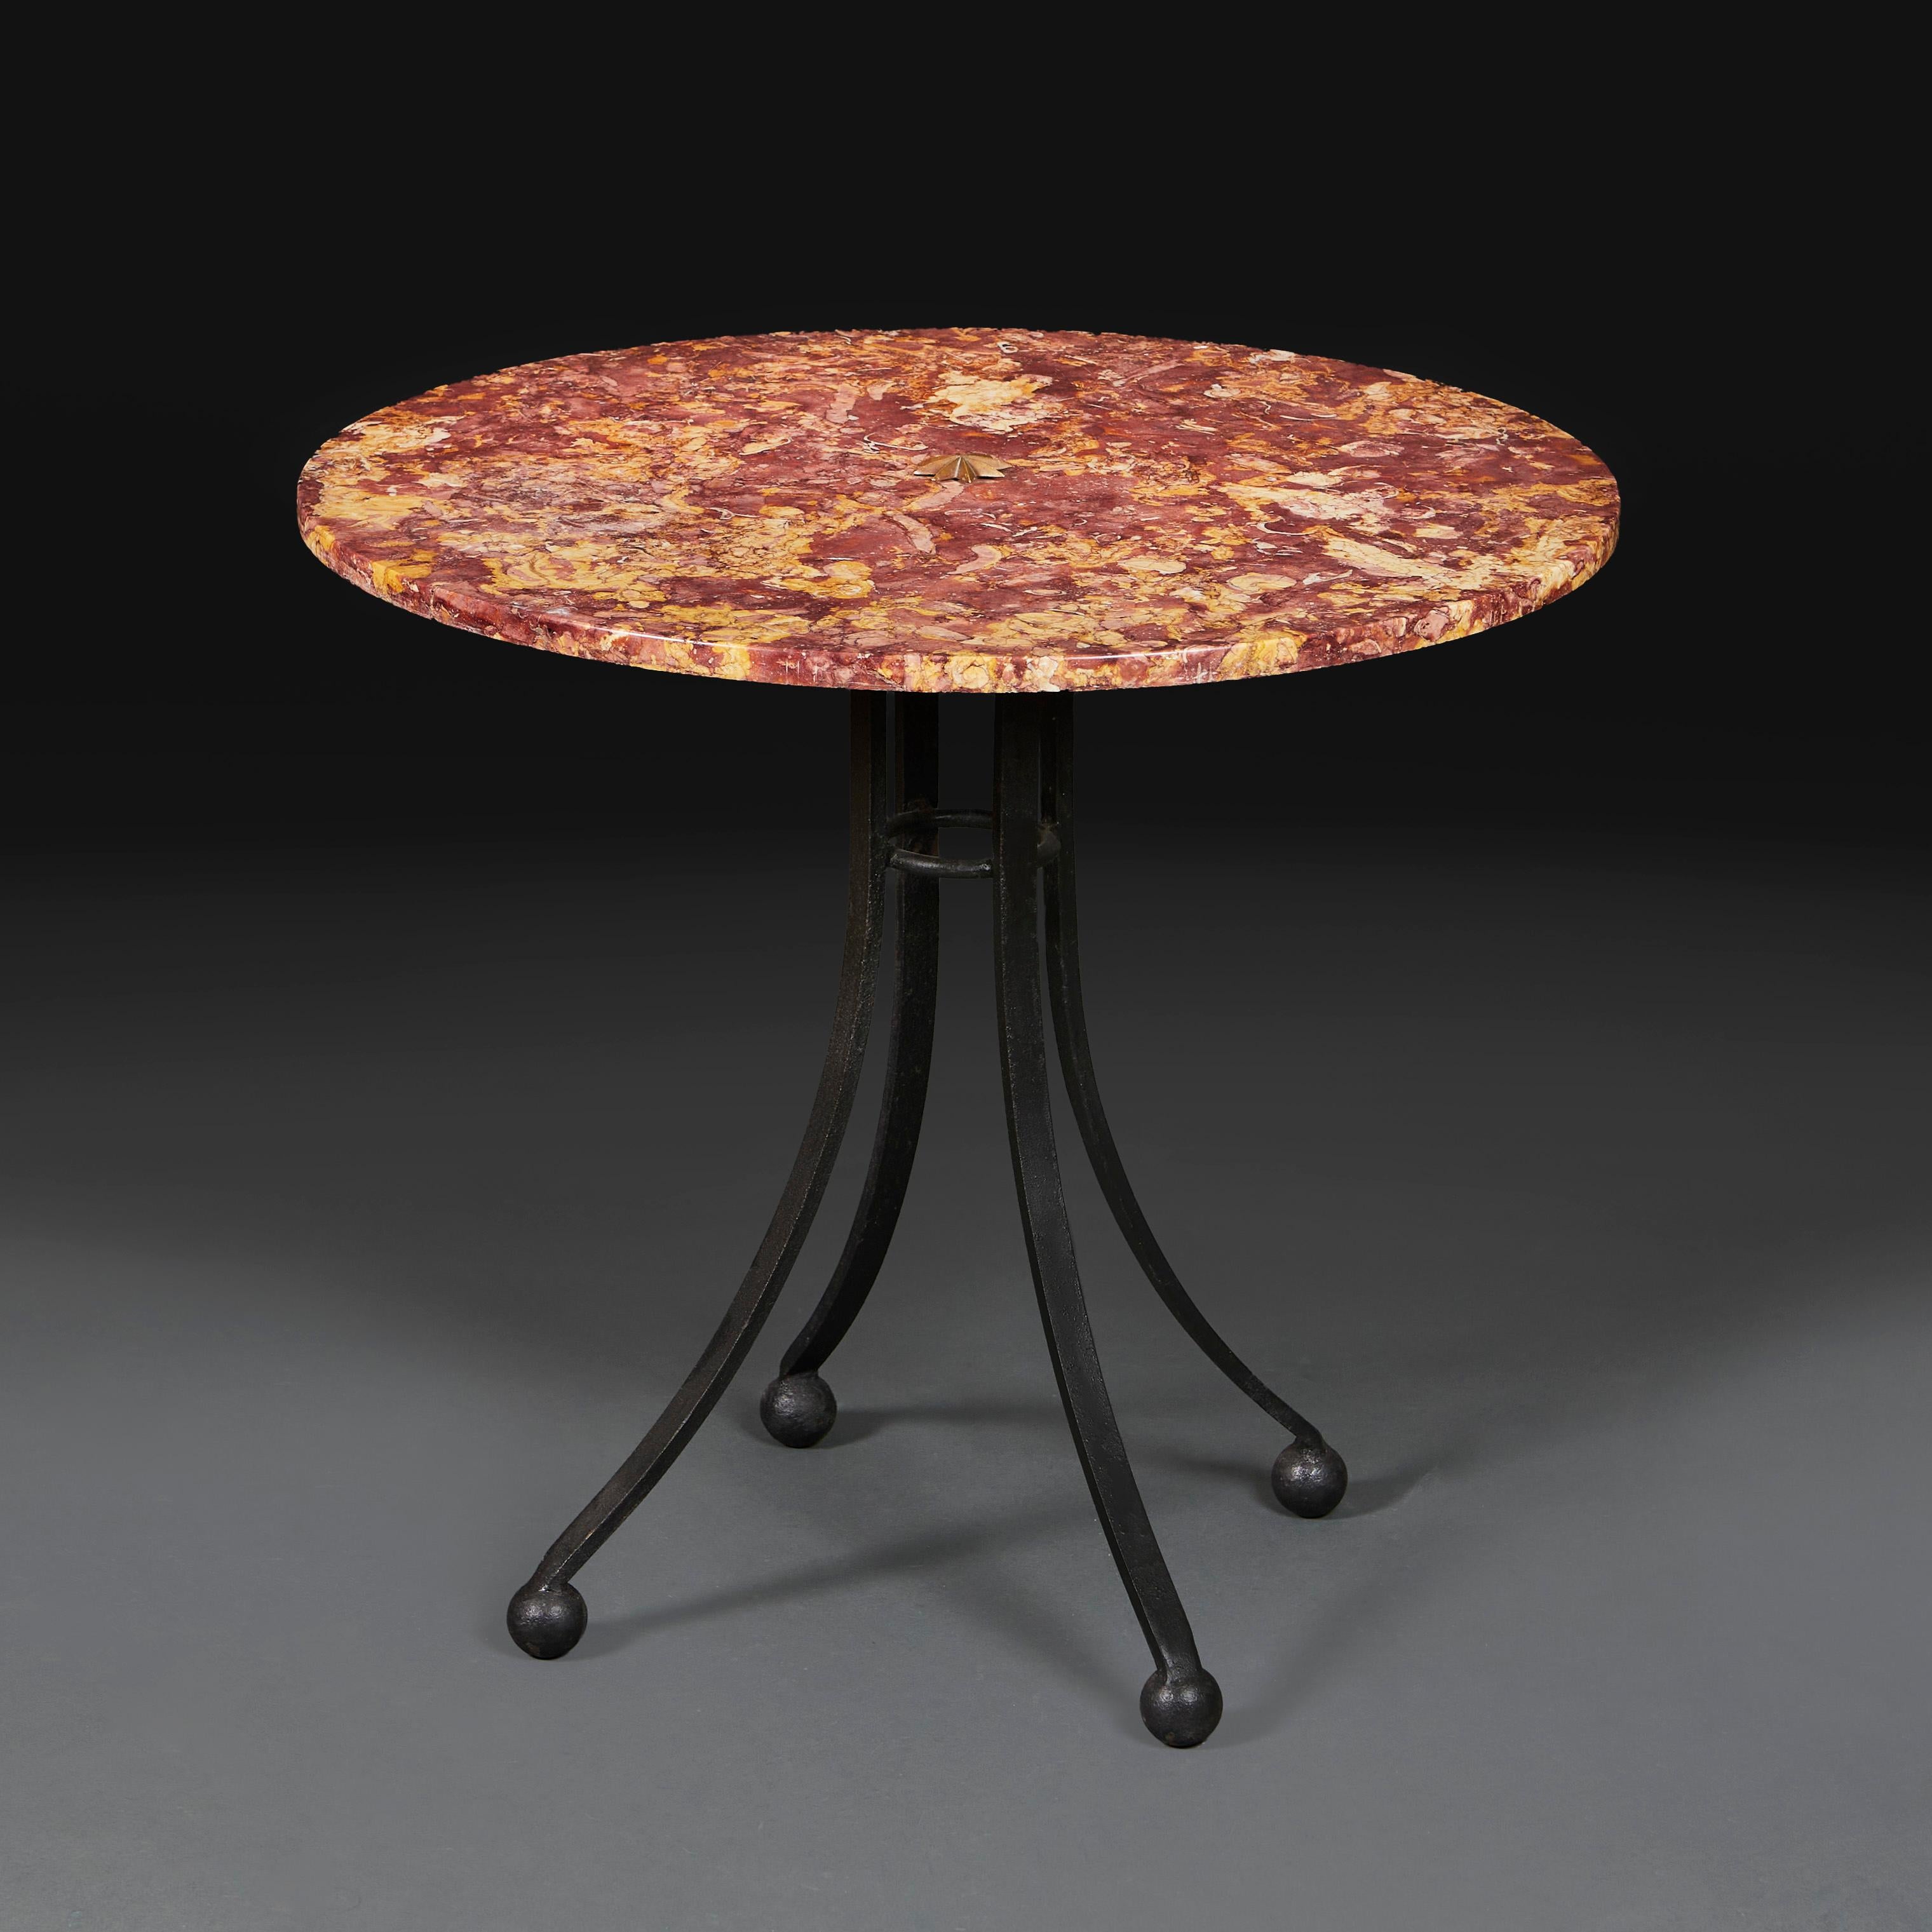 France, circa 1950.

An unusual mid twentieth century French marble gueridon, the spectacular circular red marble top supported on a wrought iron base with four splayed legs, terminating in ball feet, the top with a brass star to the centre.

Height